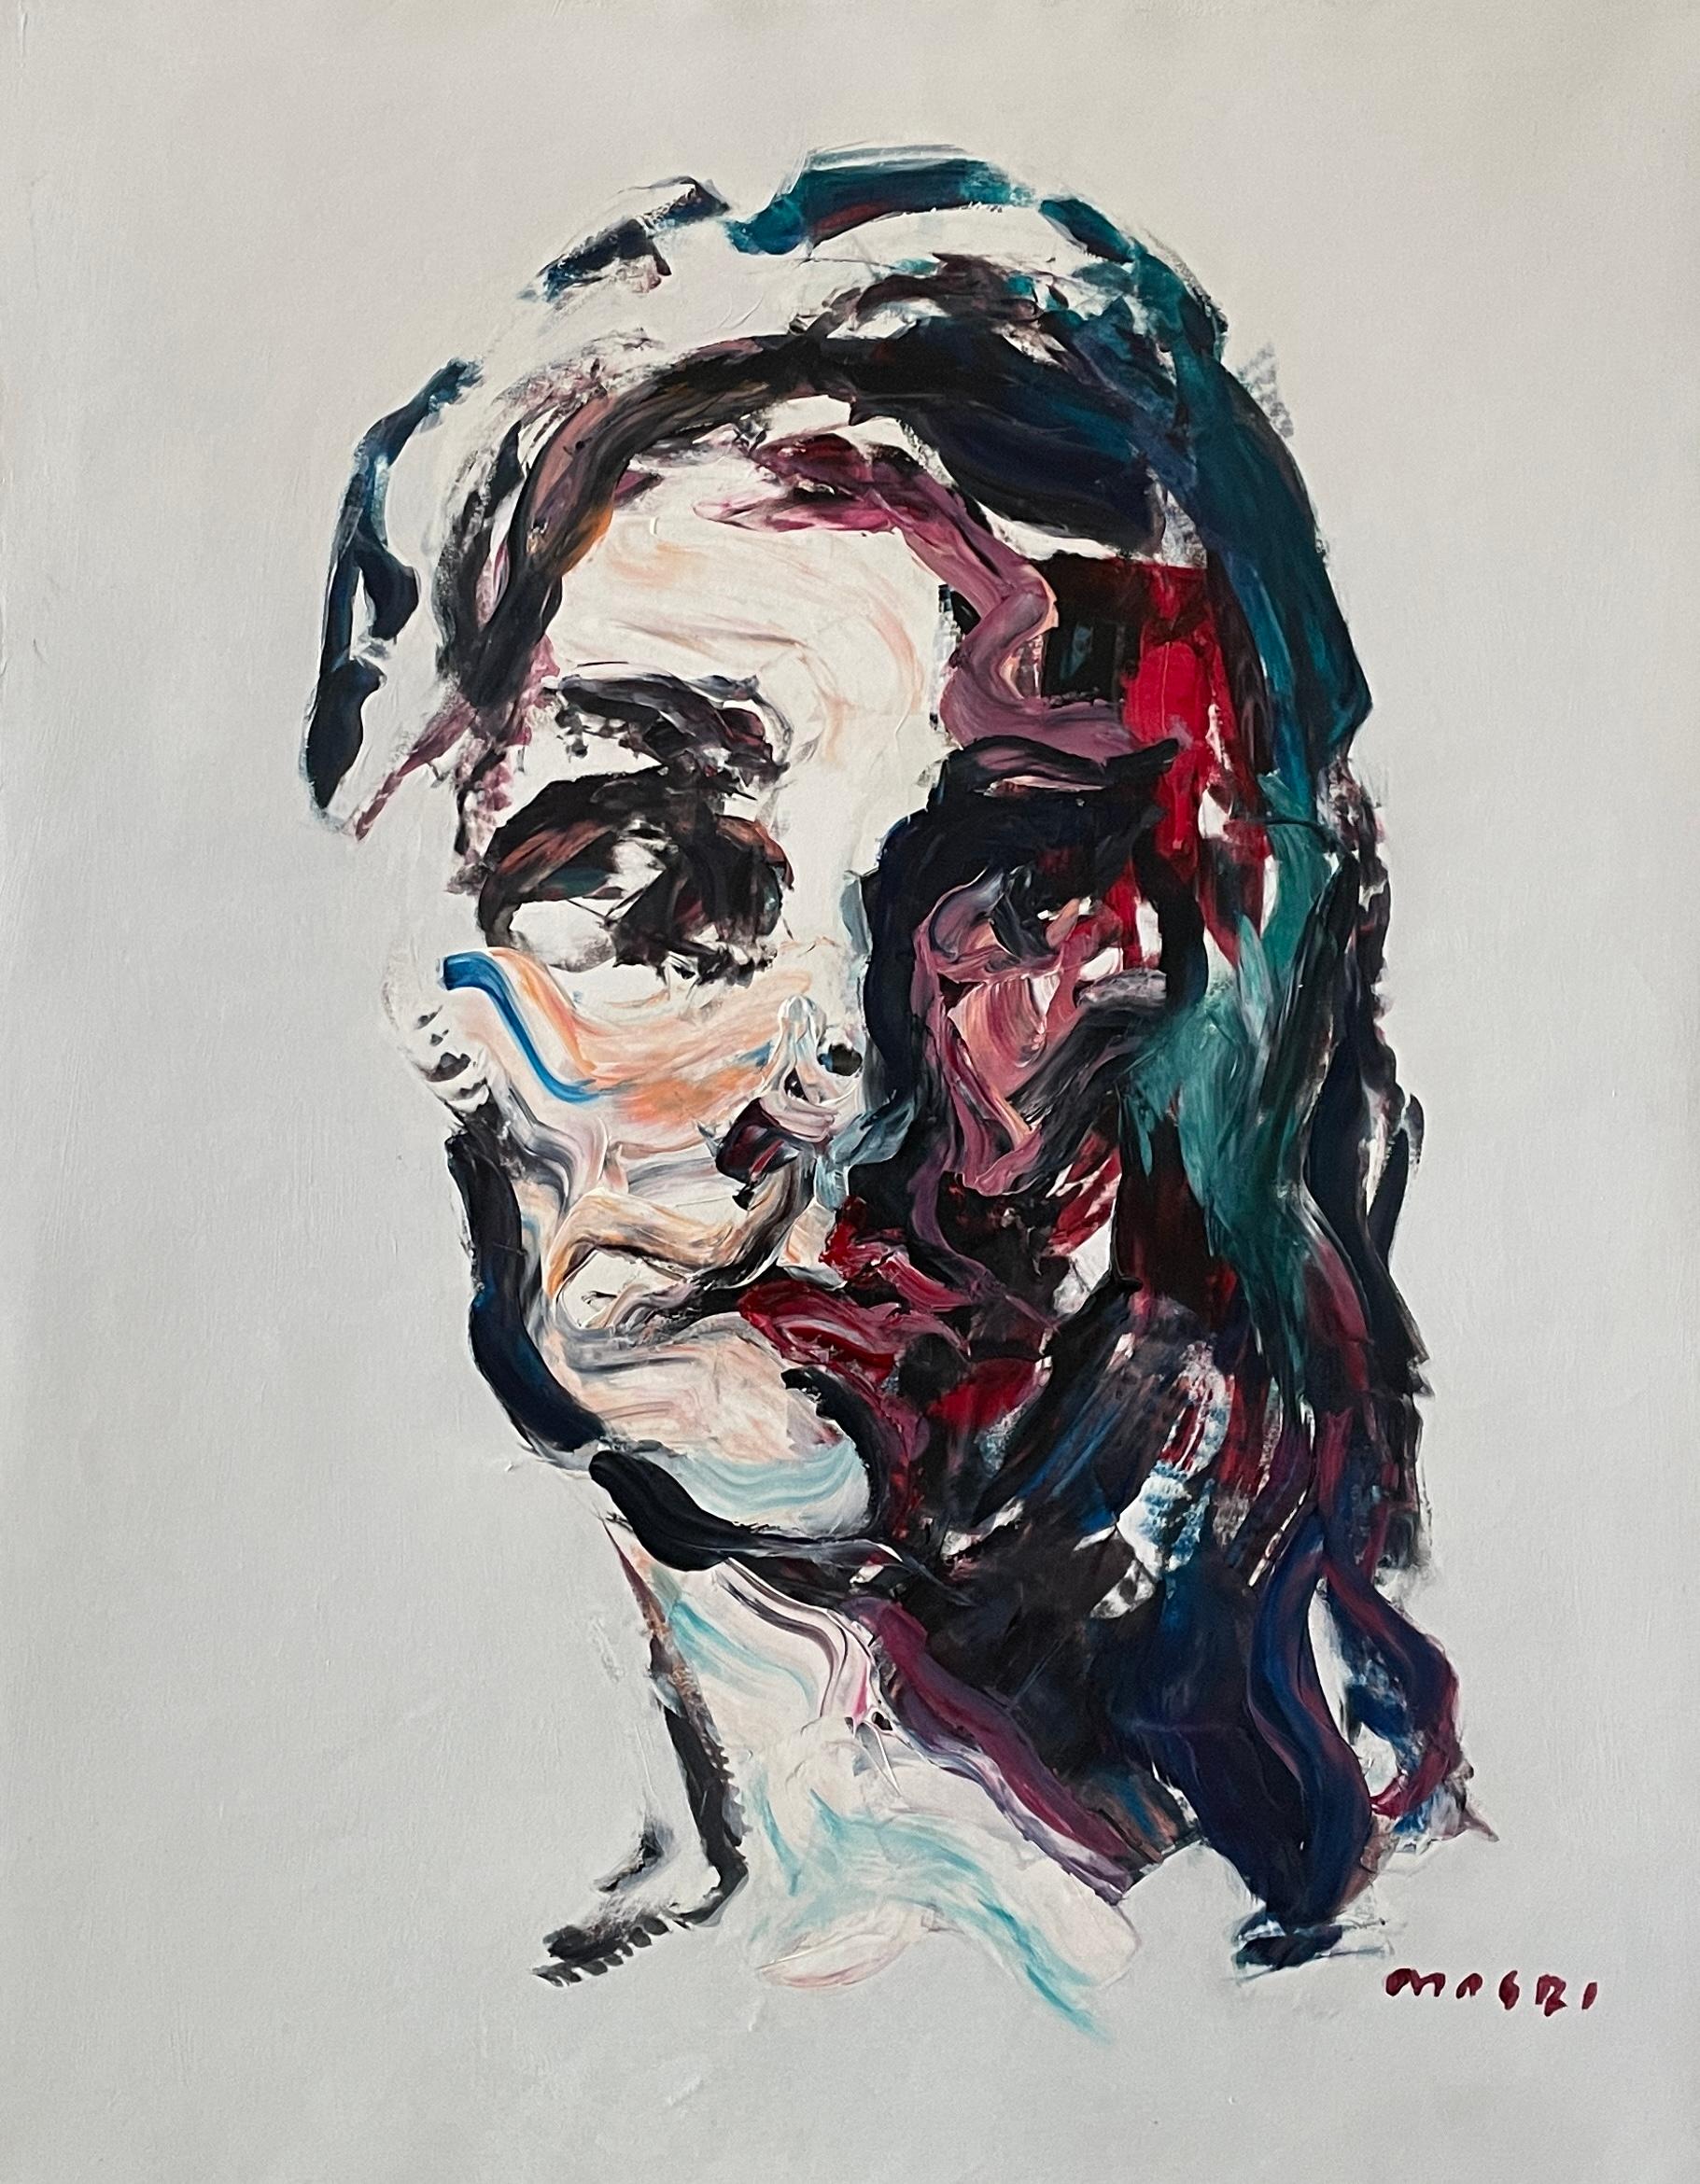 Masri Hayssam Abstract Painting - "Her" Mixed Media Contemporary Abstract Portrait Of A Young Woman by Masri